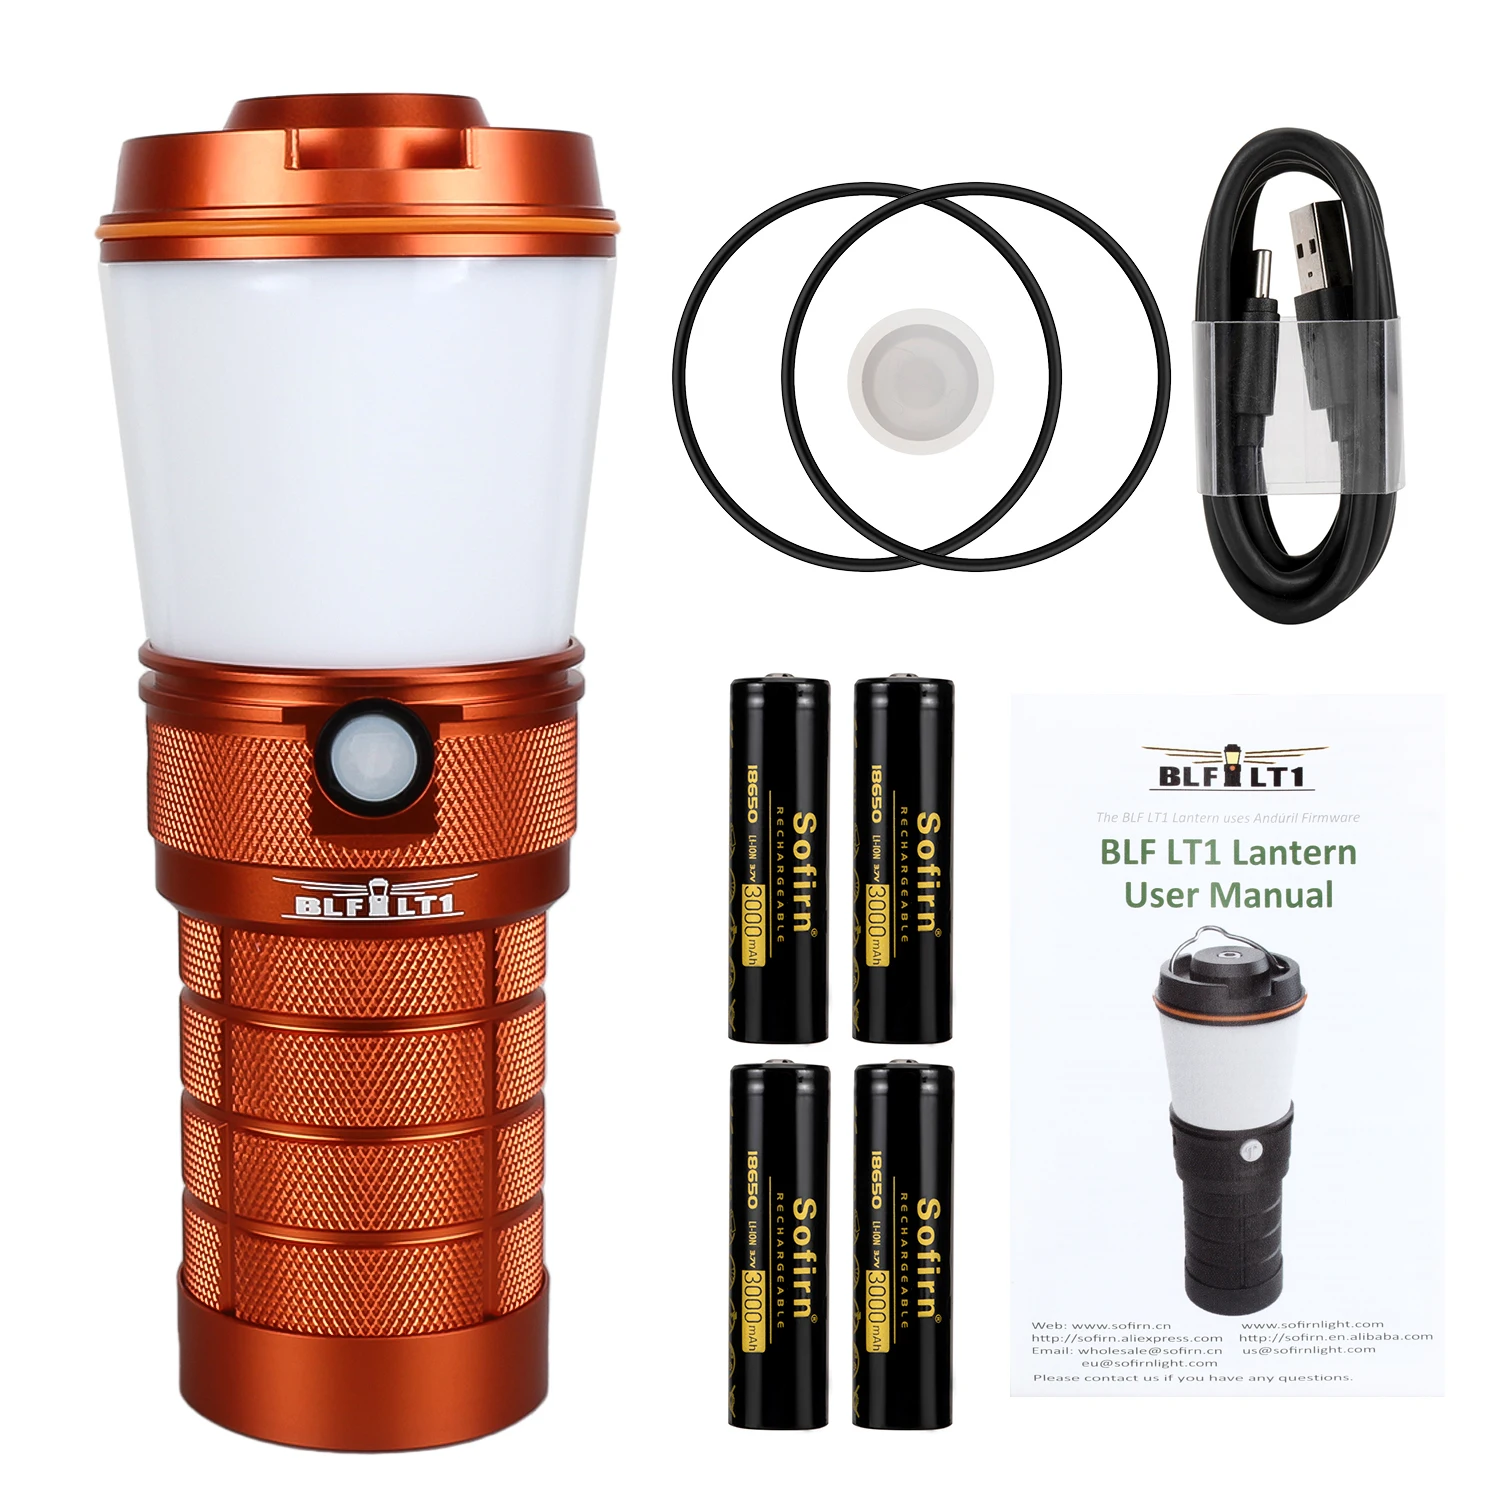 SUPER DEALS! Sofirn BLF LT1 LED Camping Light Super Bright Rechargeable Camping Lantern Hiking Torch Spotlight Variable Color 2700K to 5000K